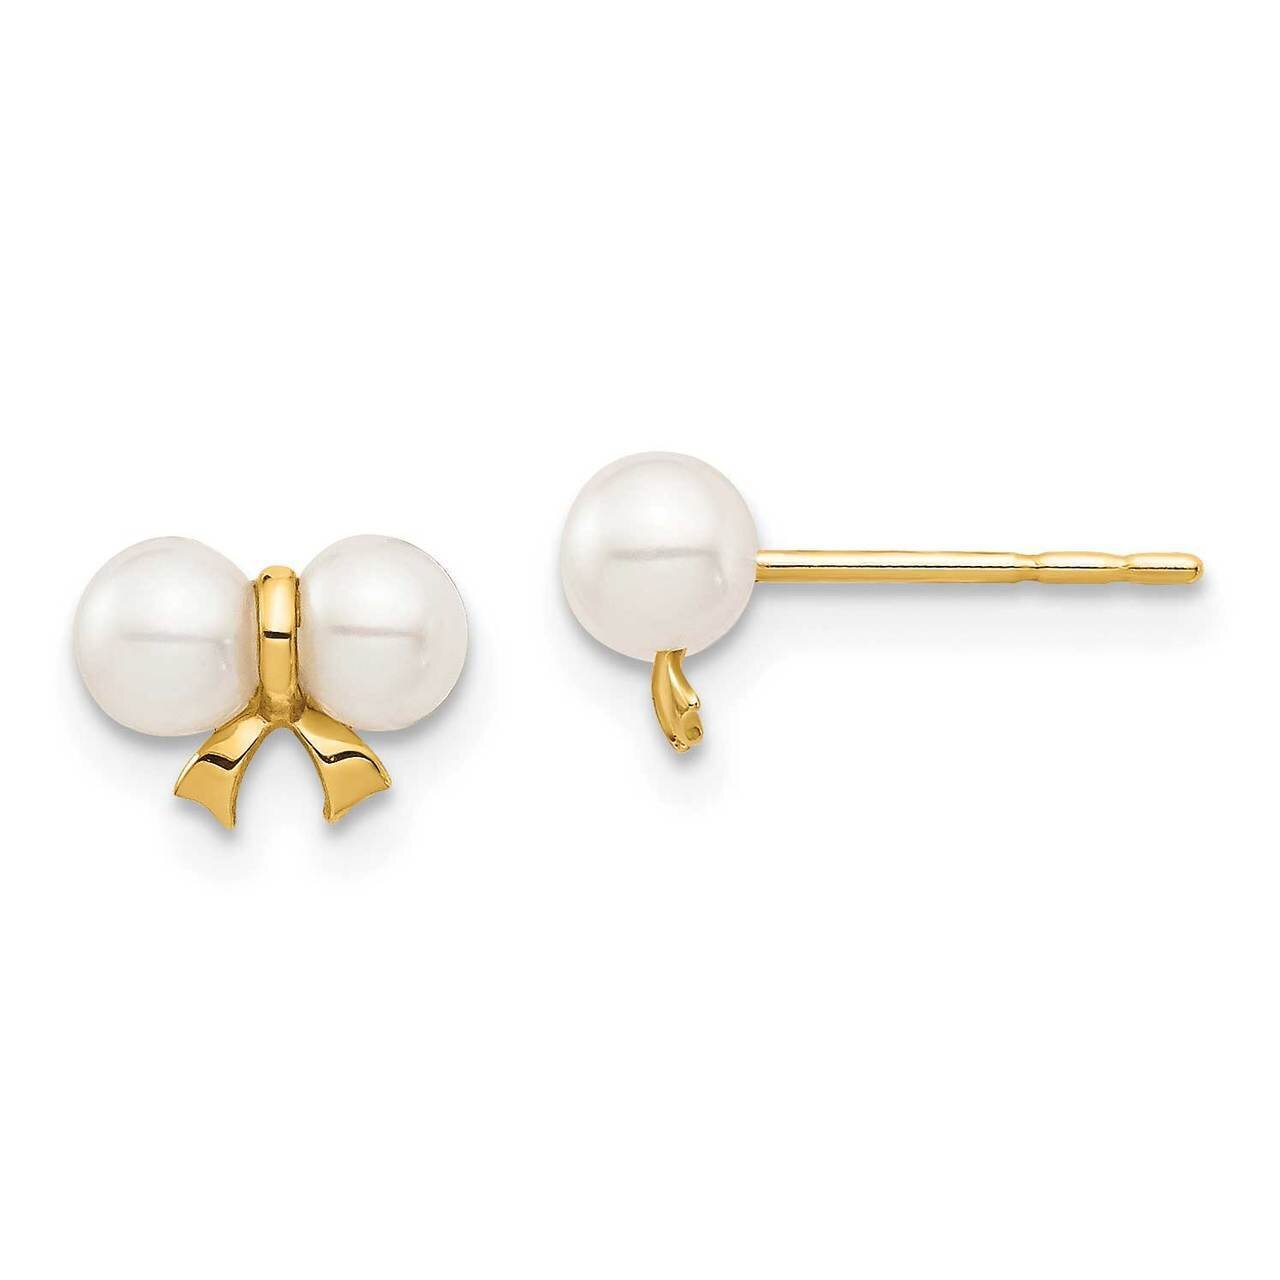 3-4mm White Round Freshwater Cultured Pearl Bow Post Earrings 14k Gold SE2973